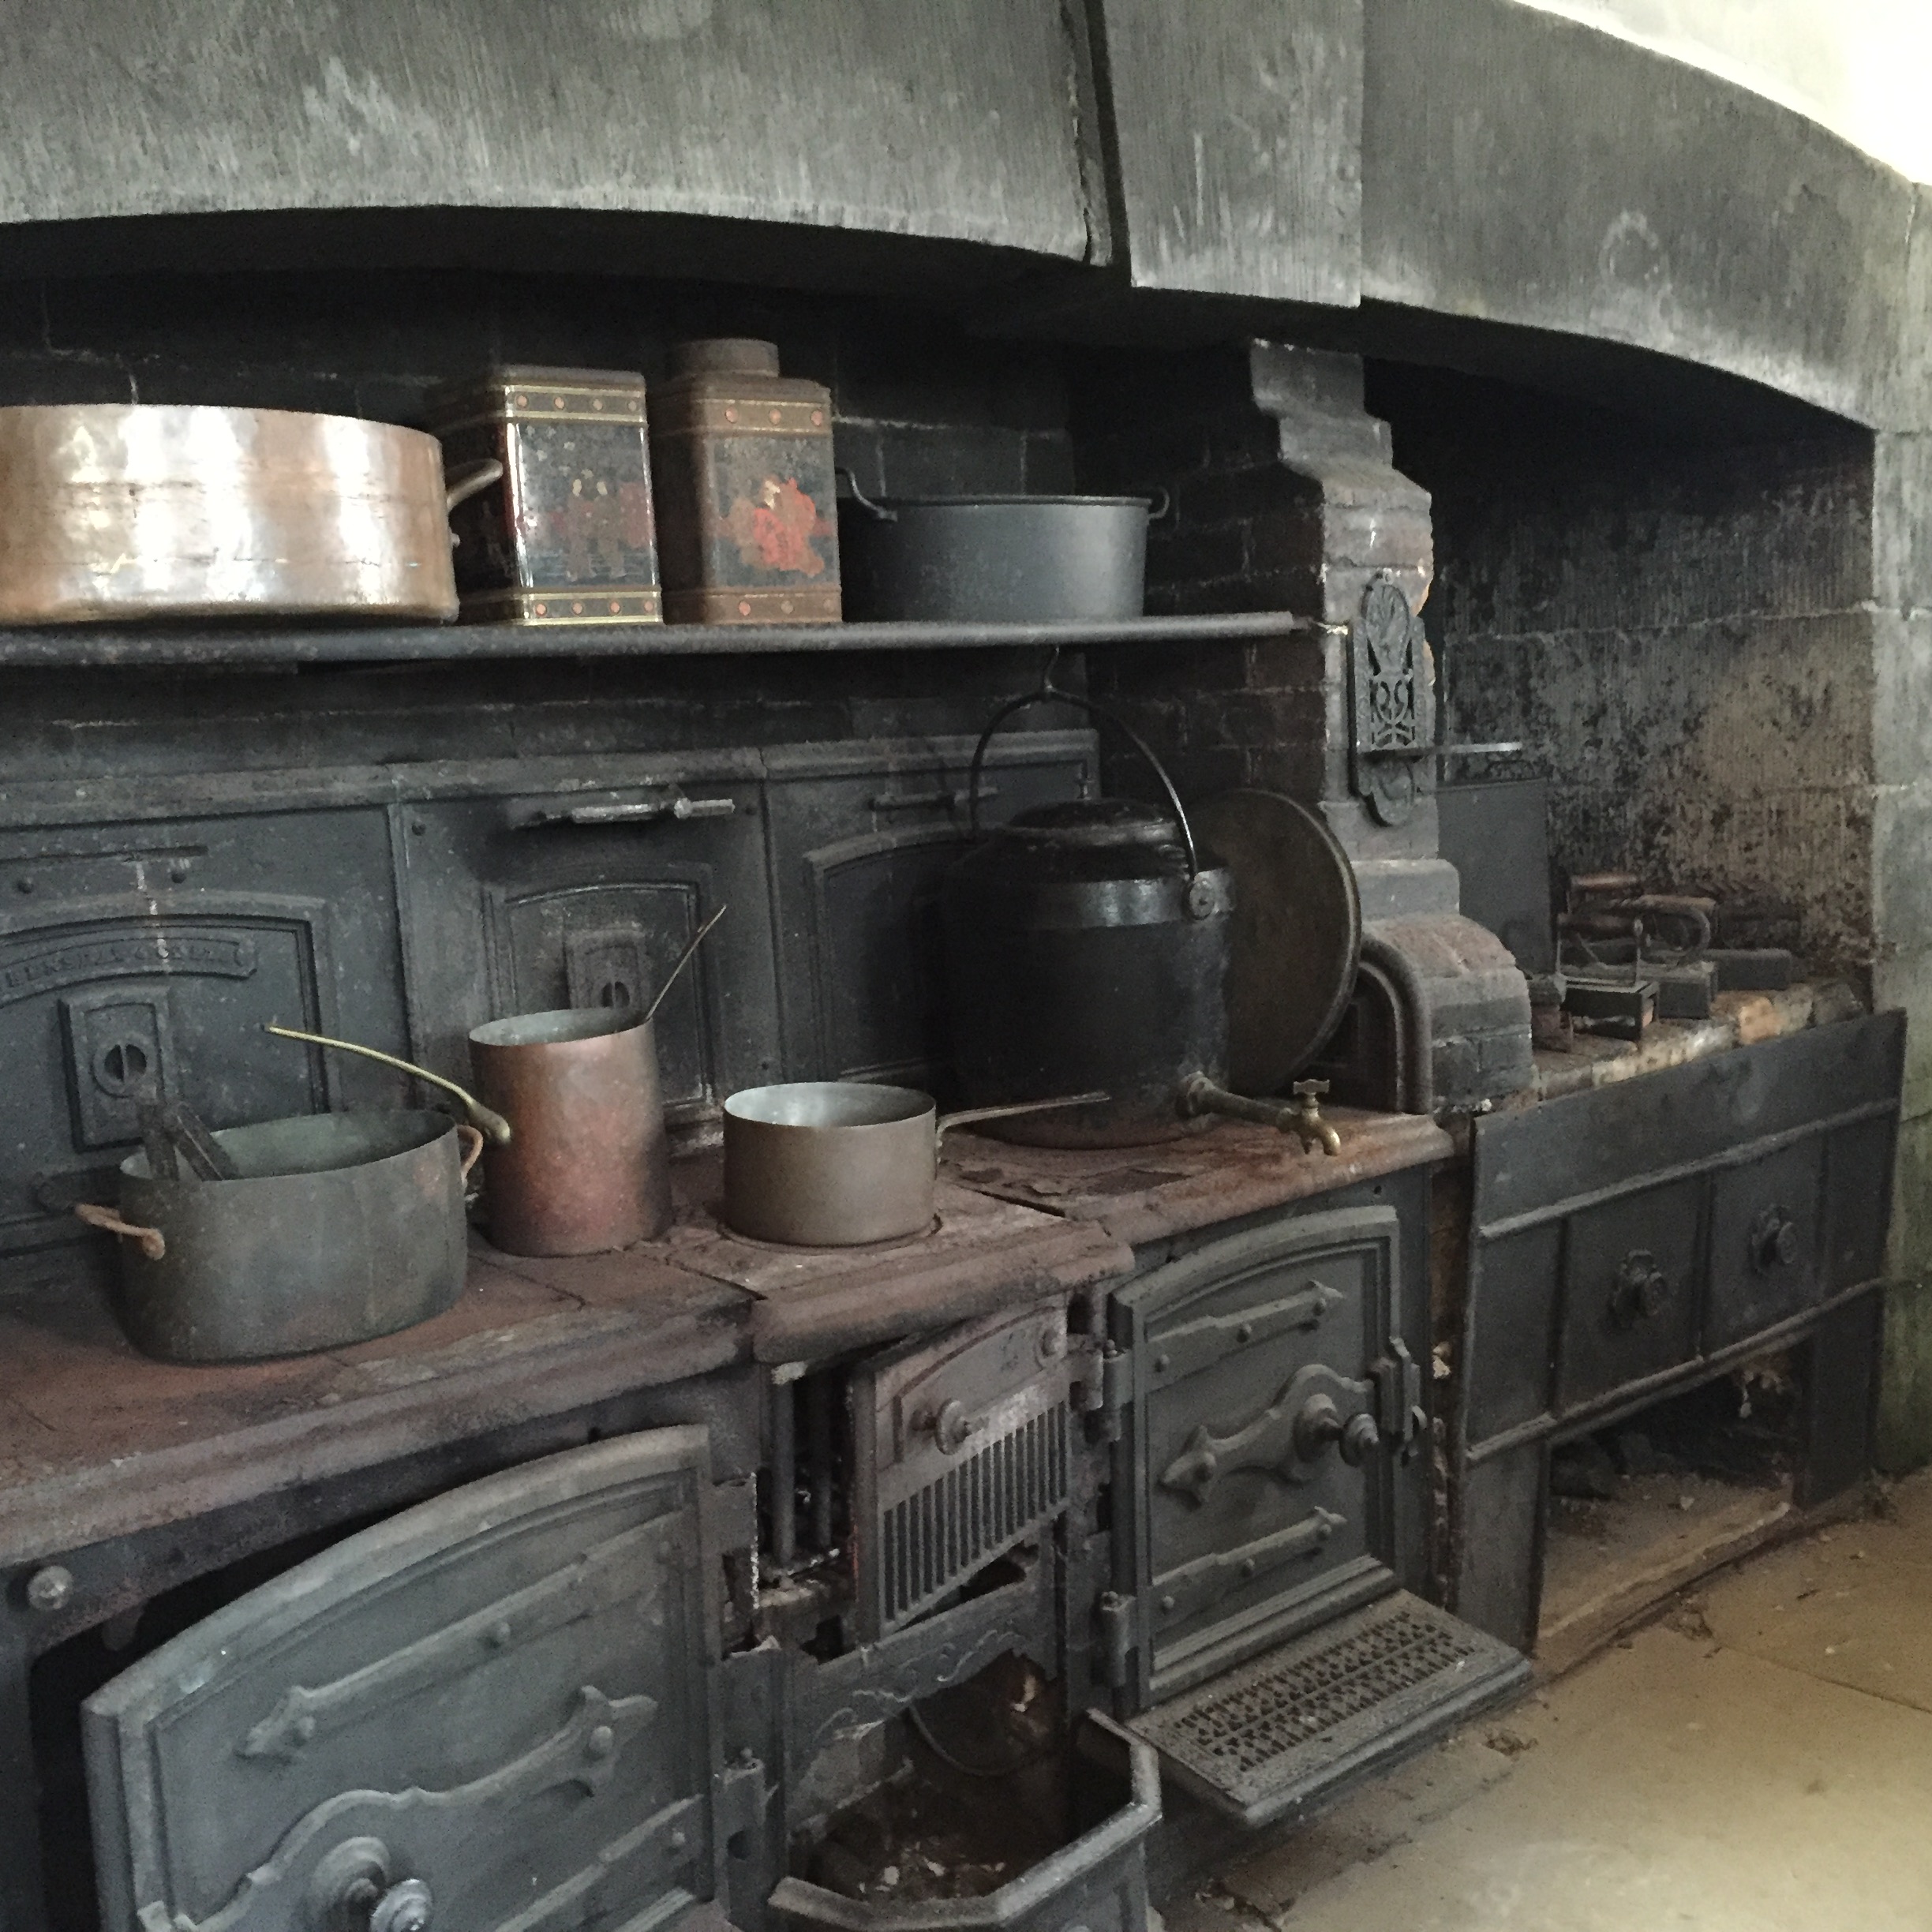 More Stoves and Ovens